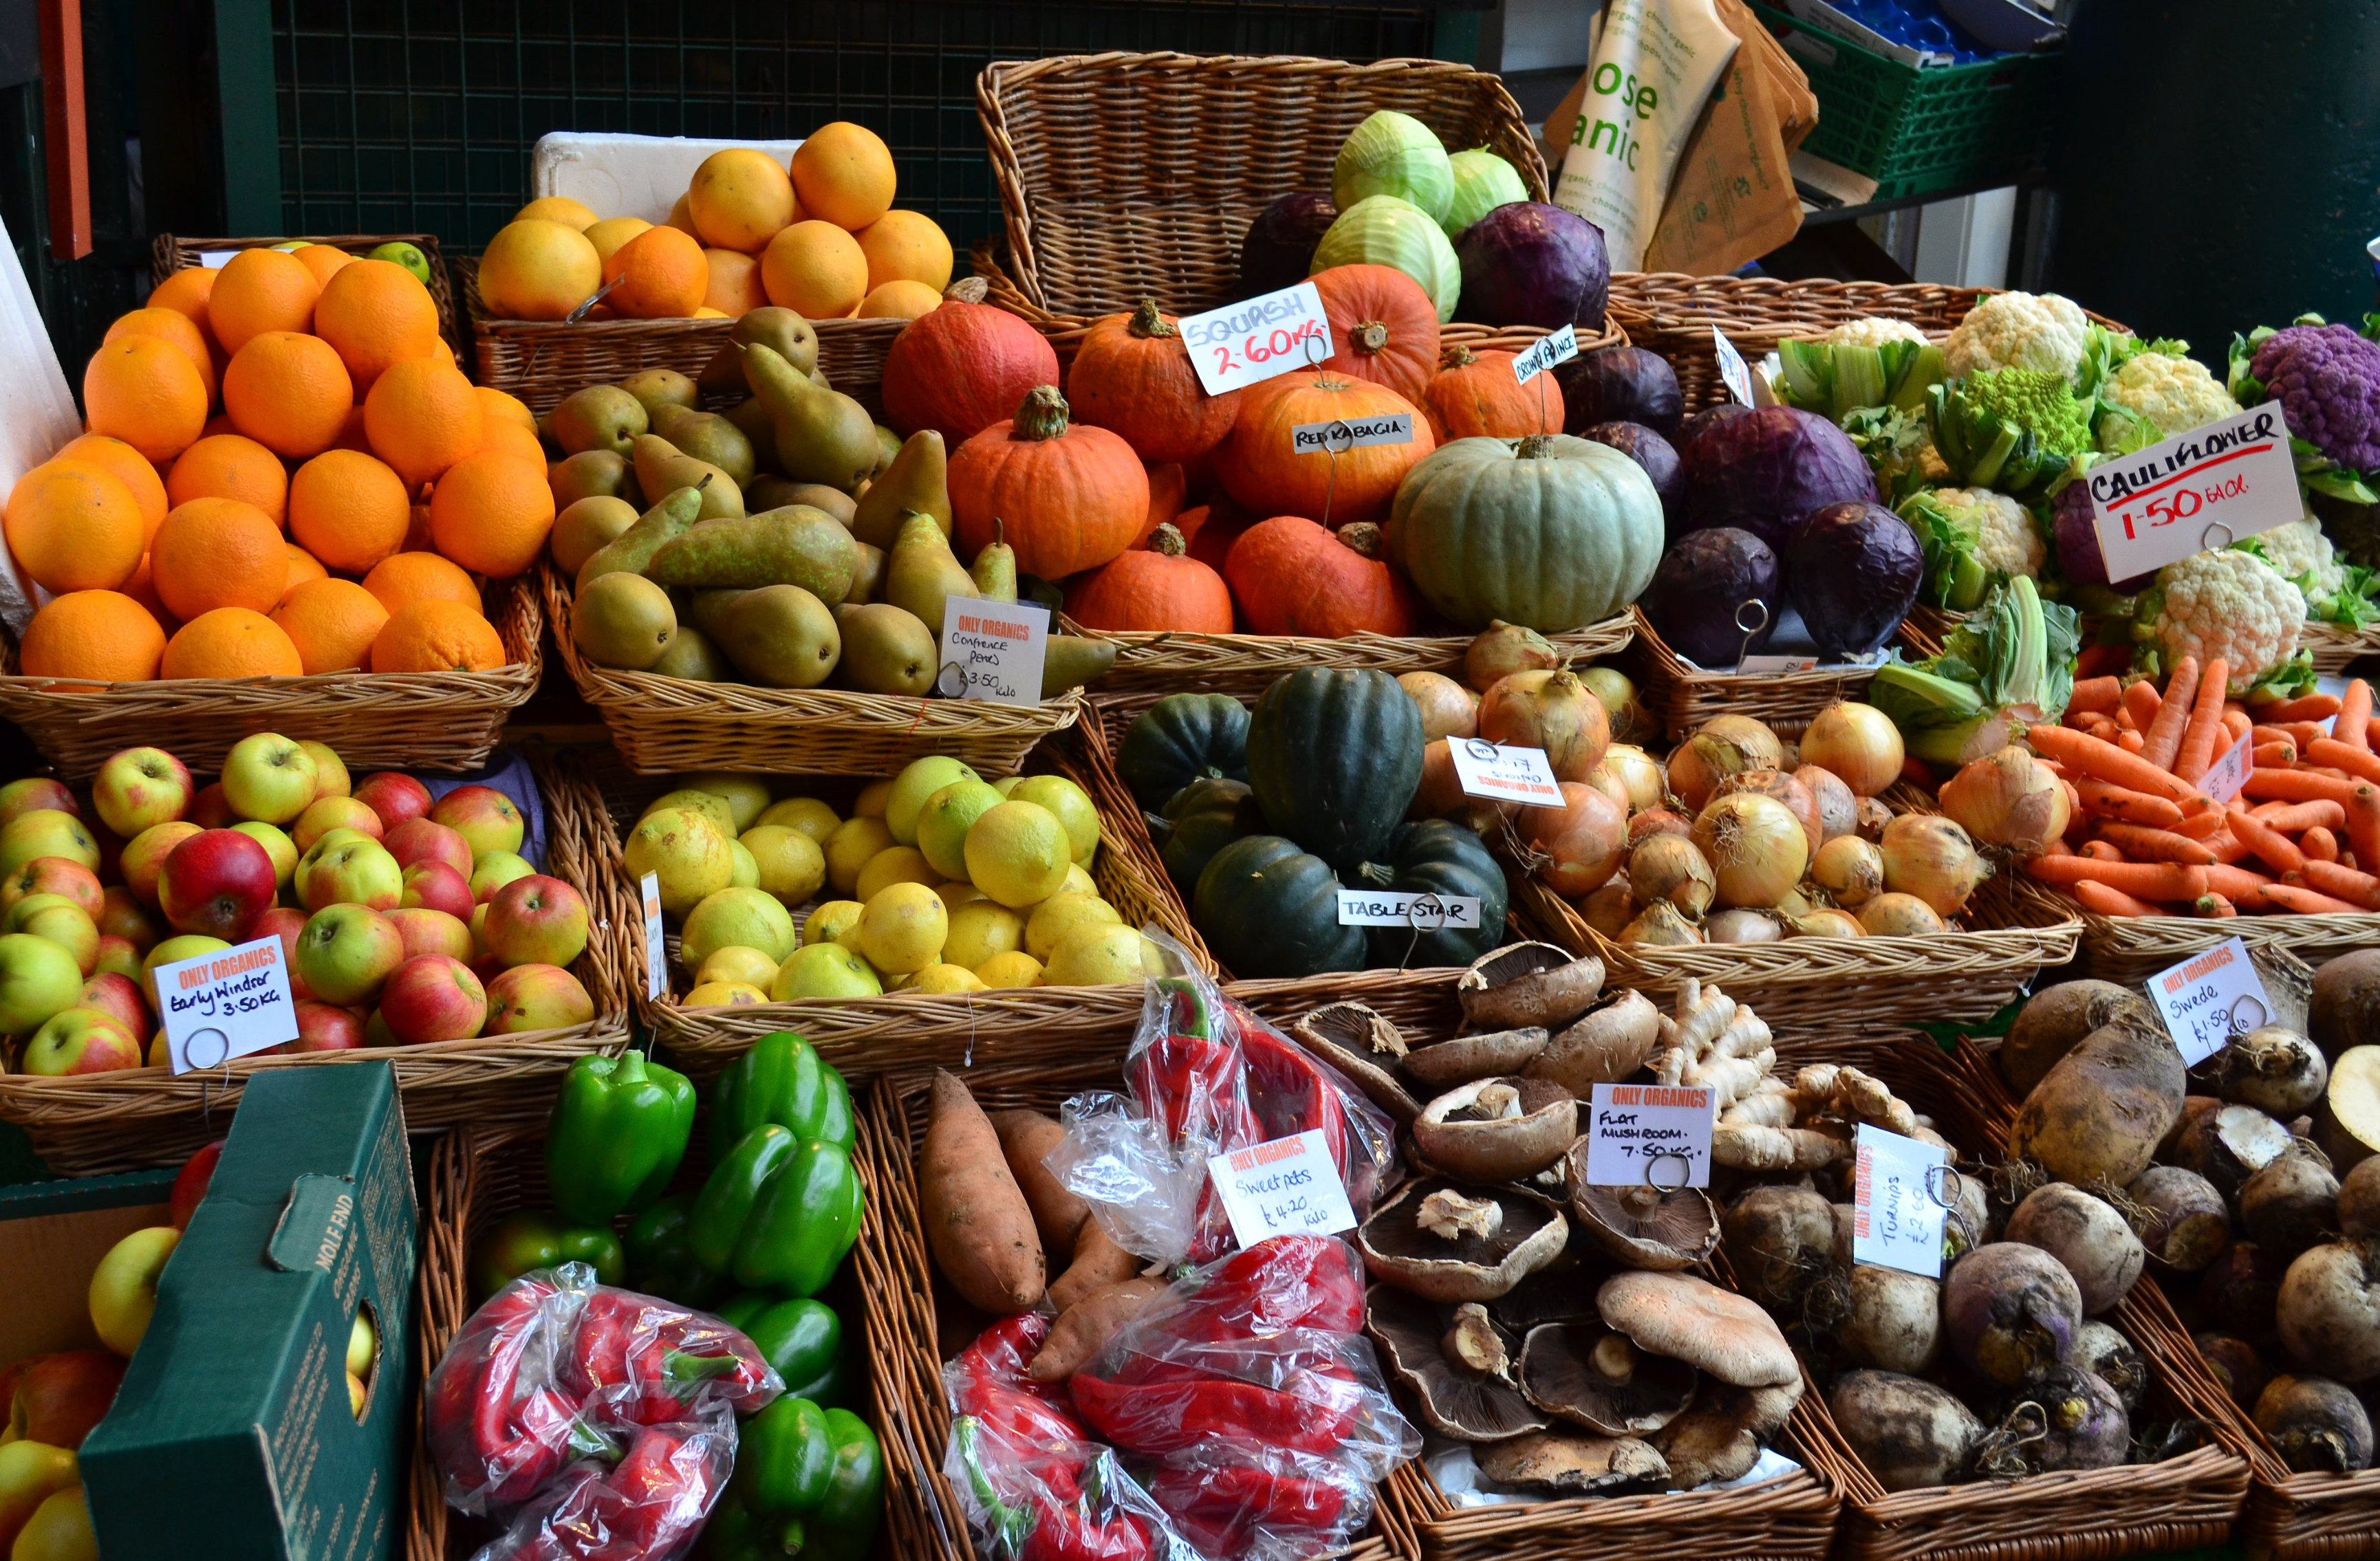 Fruit and veg seen in Londons Borough Market credit Garry Knight CC BY 2.0